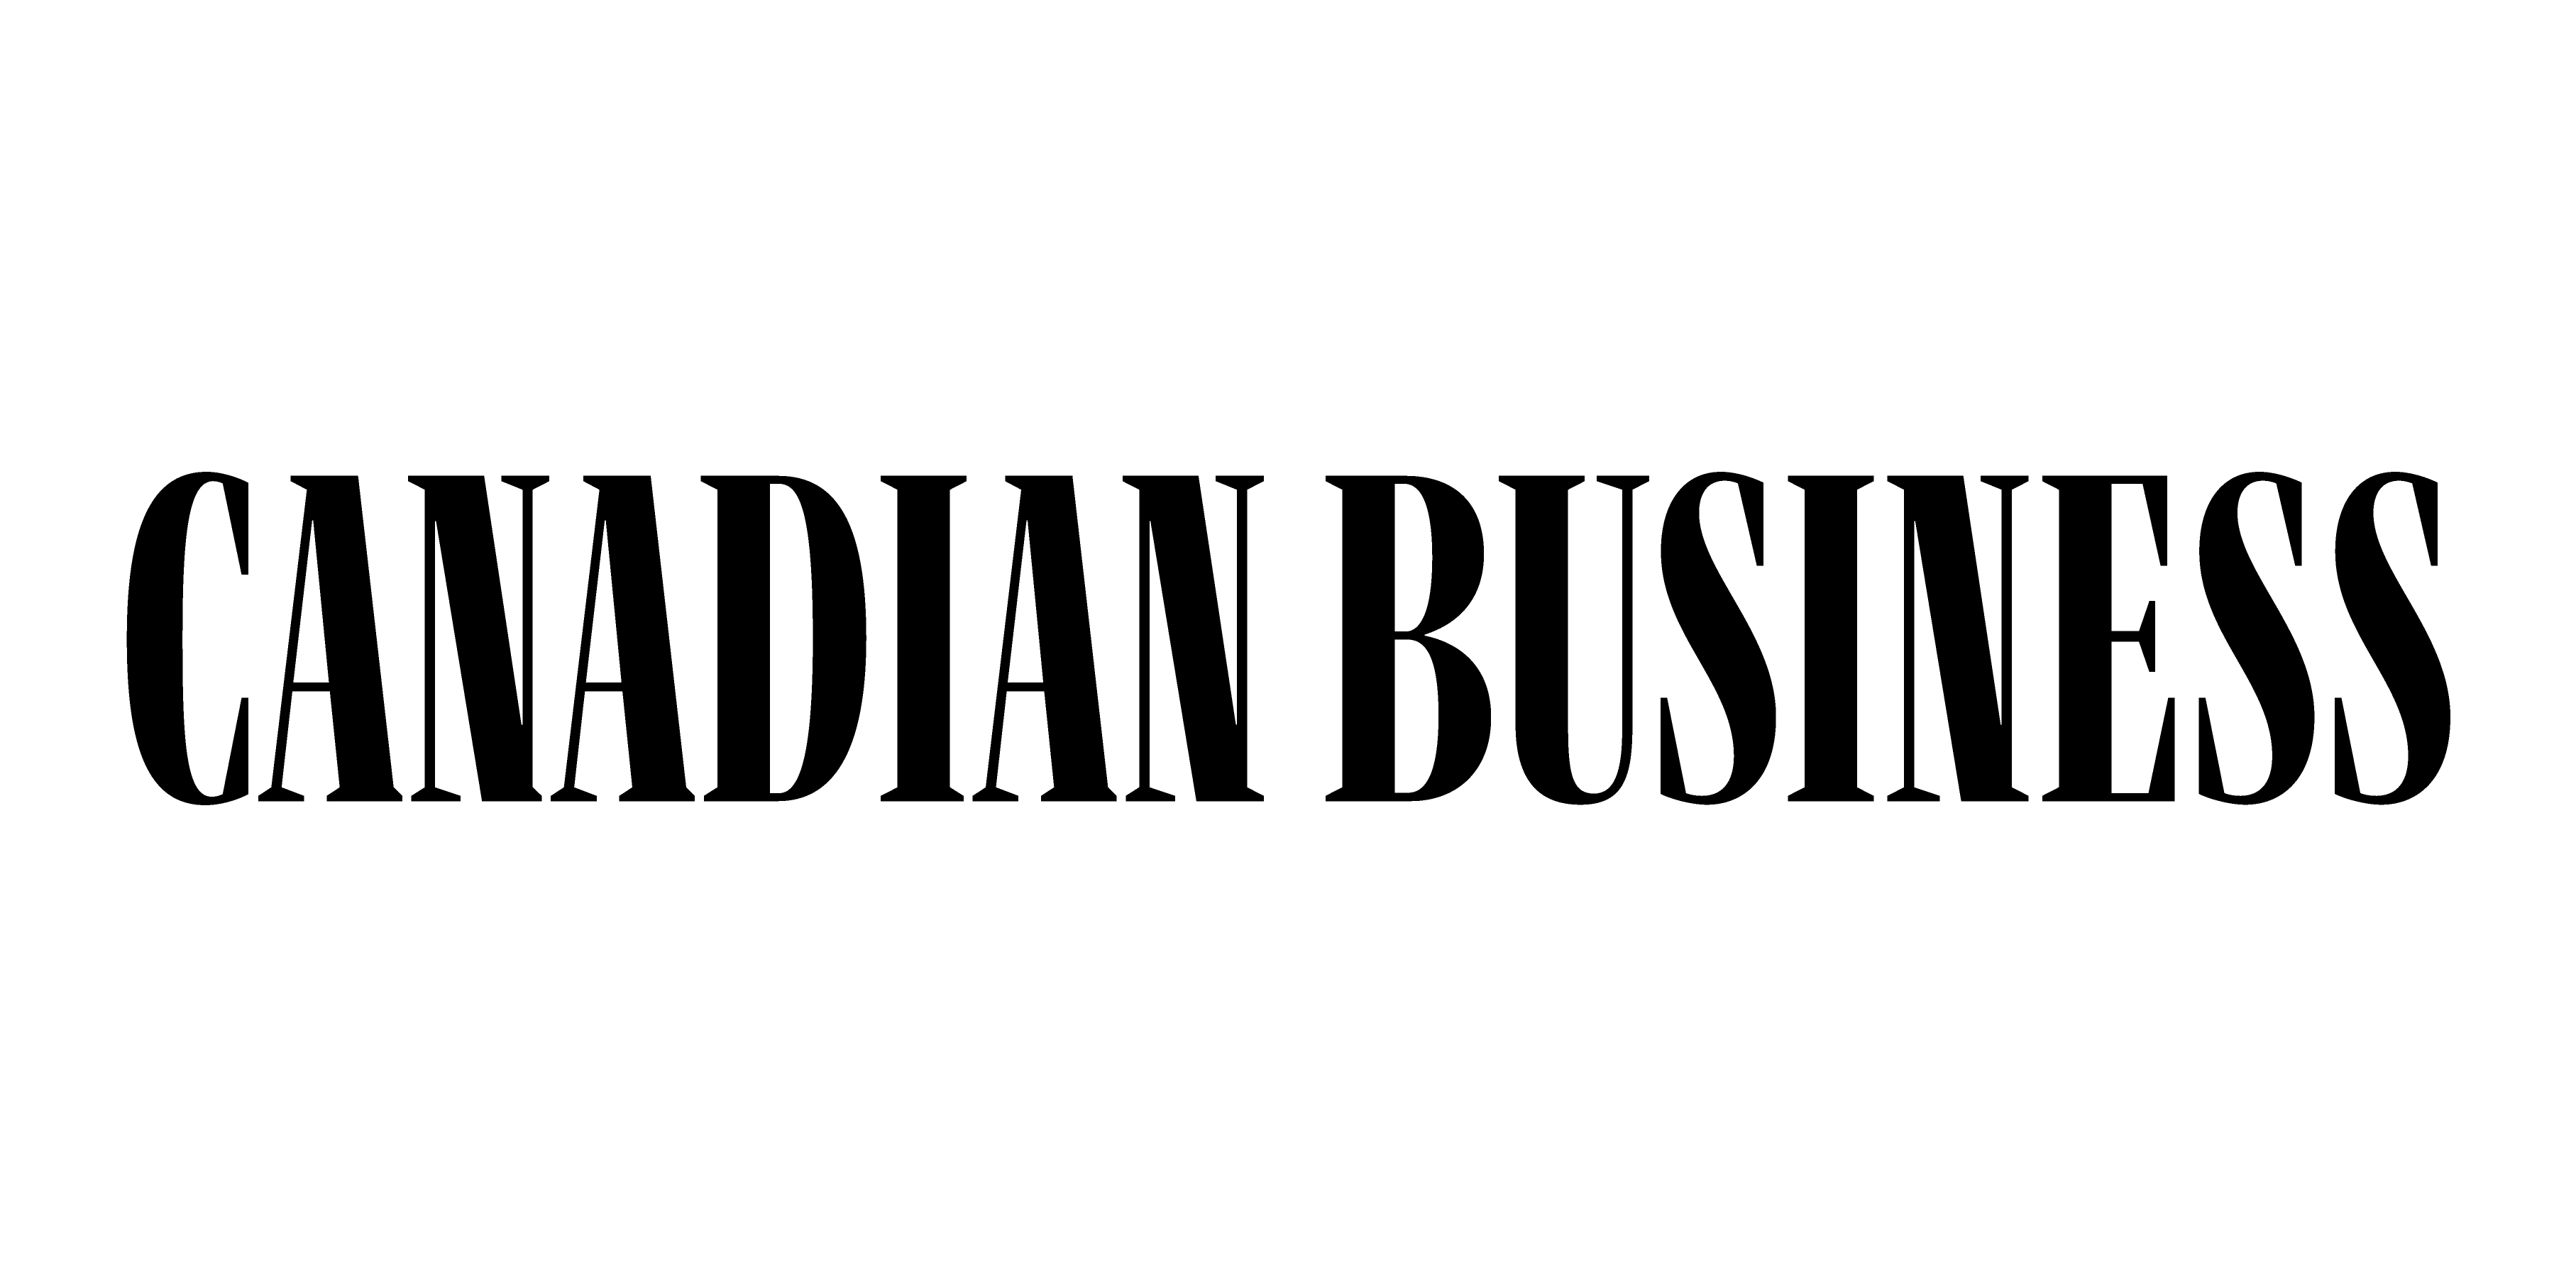 Canadian business